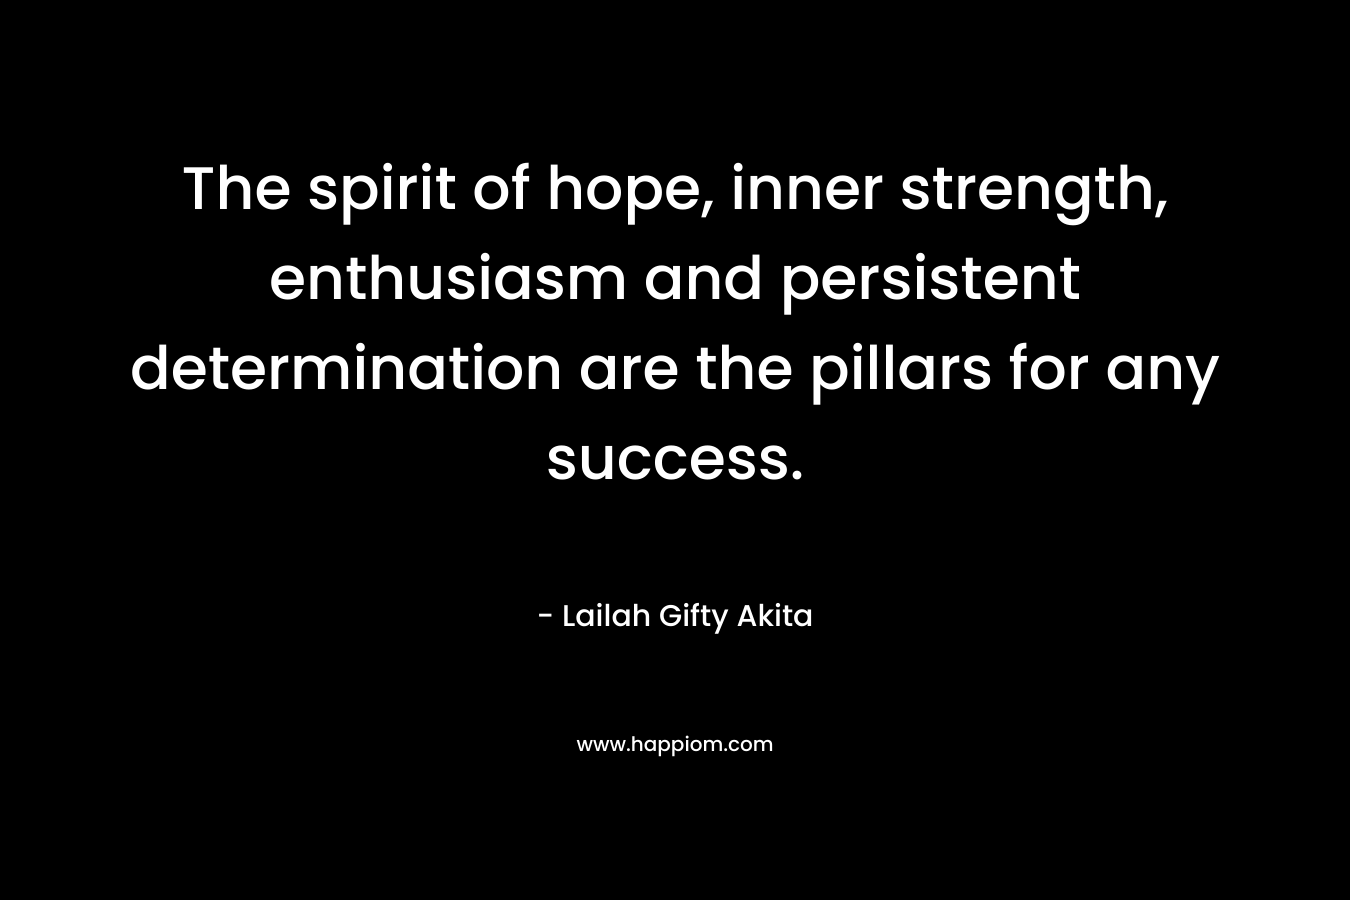 The spirit of hope, inner strength, enthusiasm and persistent determination are the pillars for any success.